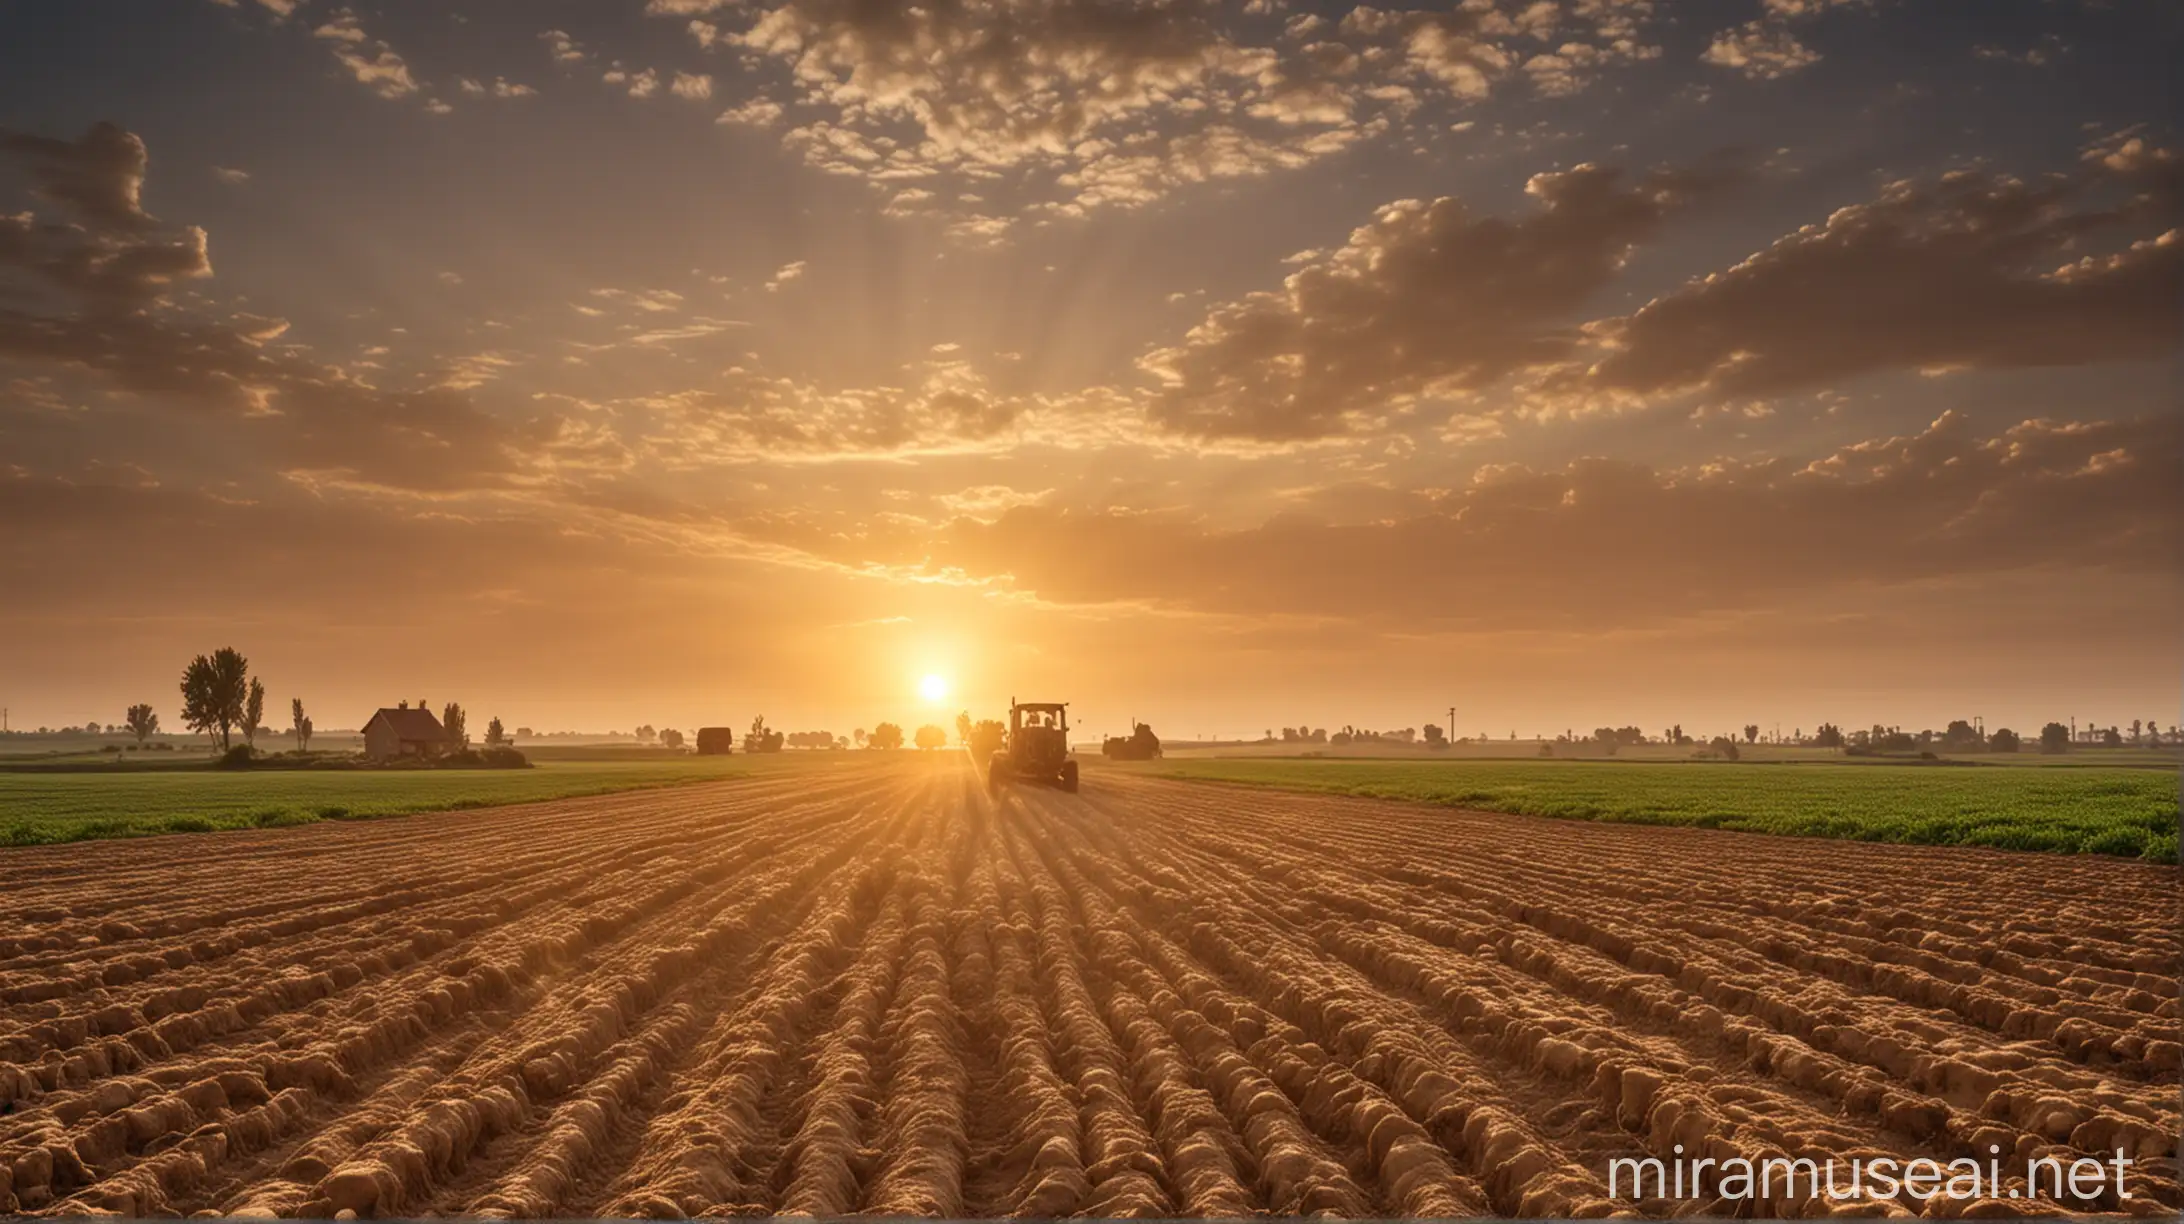 Bountiful Sunrise Harvest Wheat Farming Potatoes and Carrots in Moderate Climate